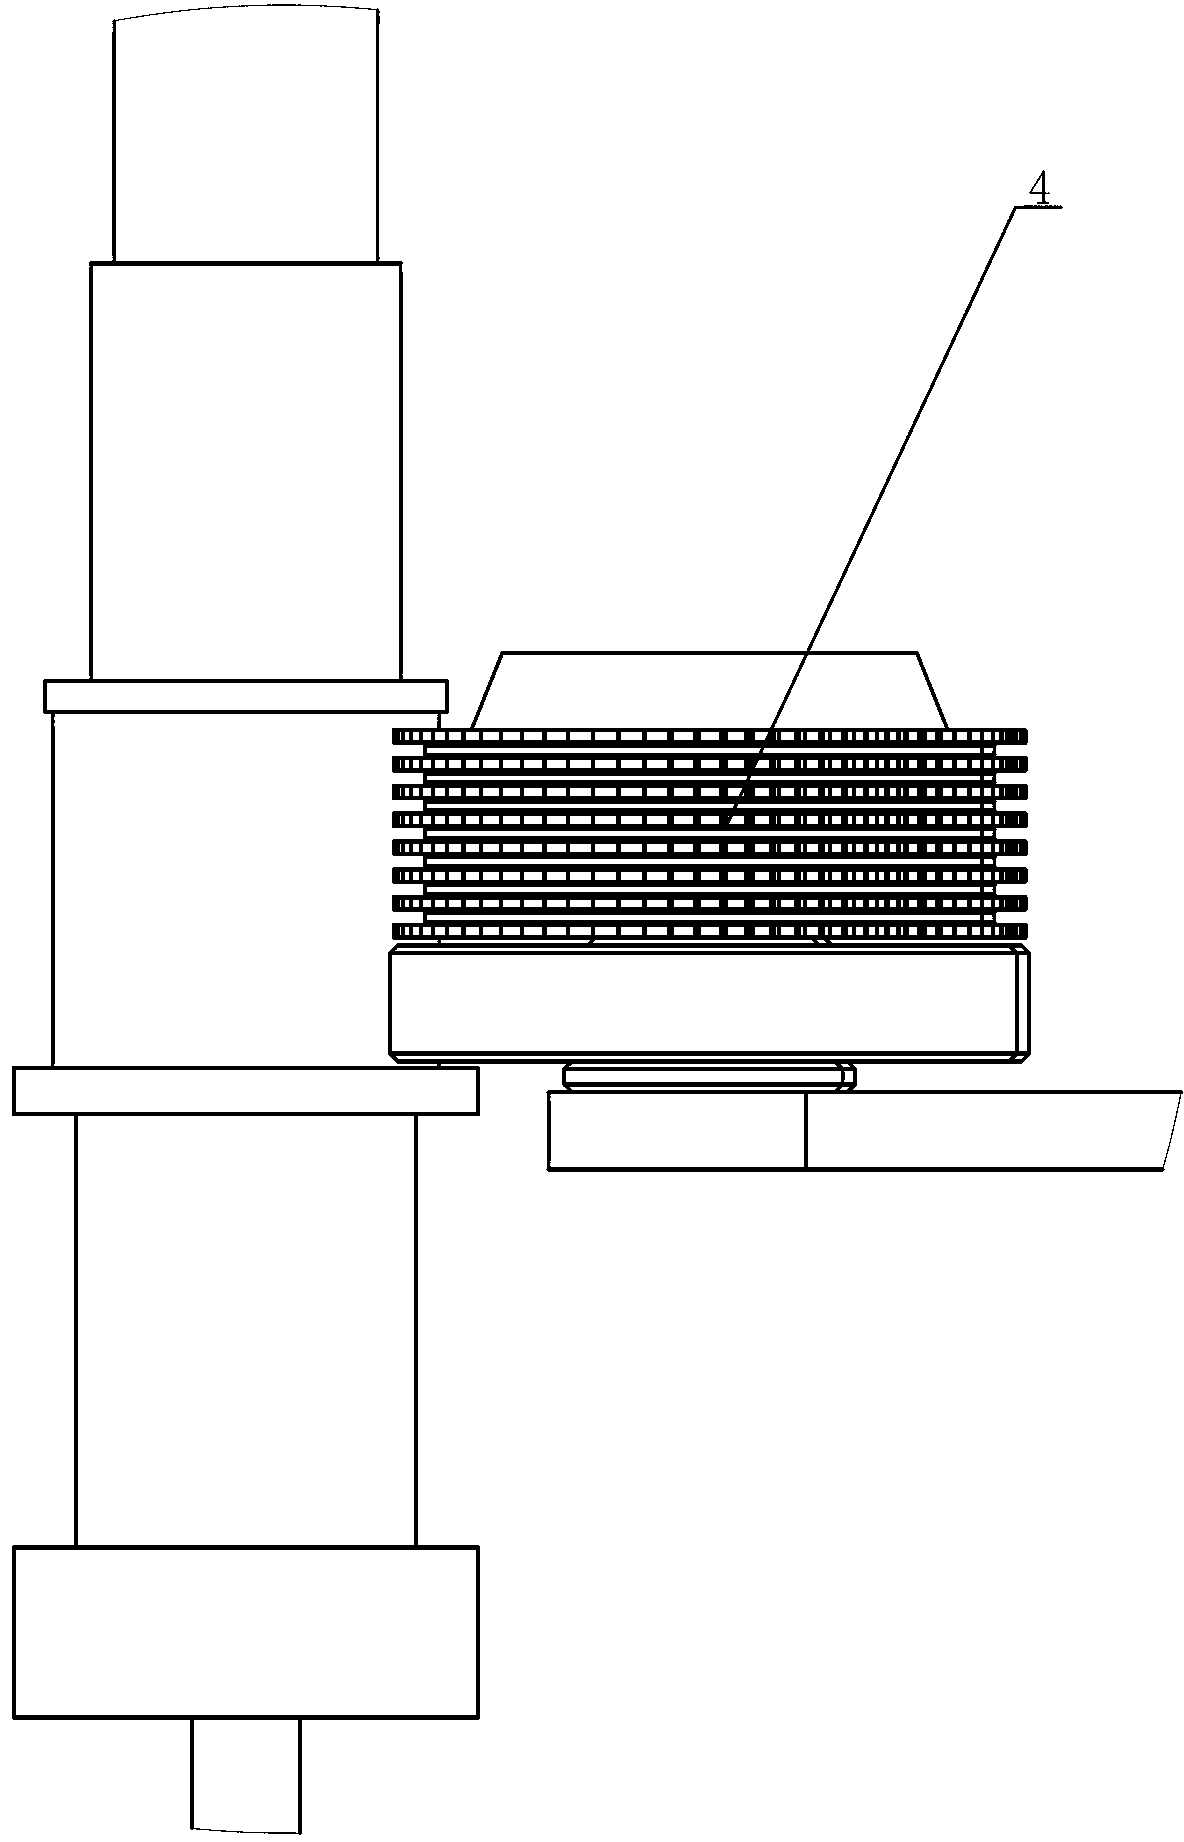 Device for automatically cleaning tail yarn